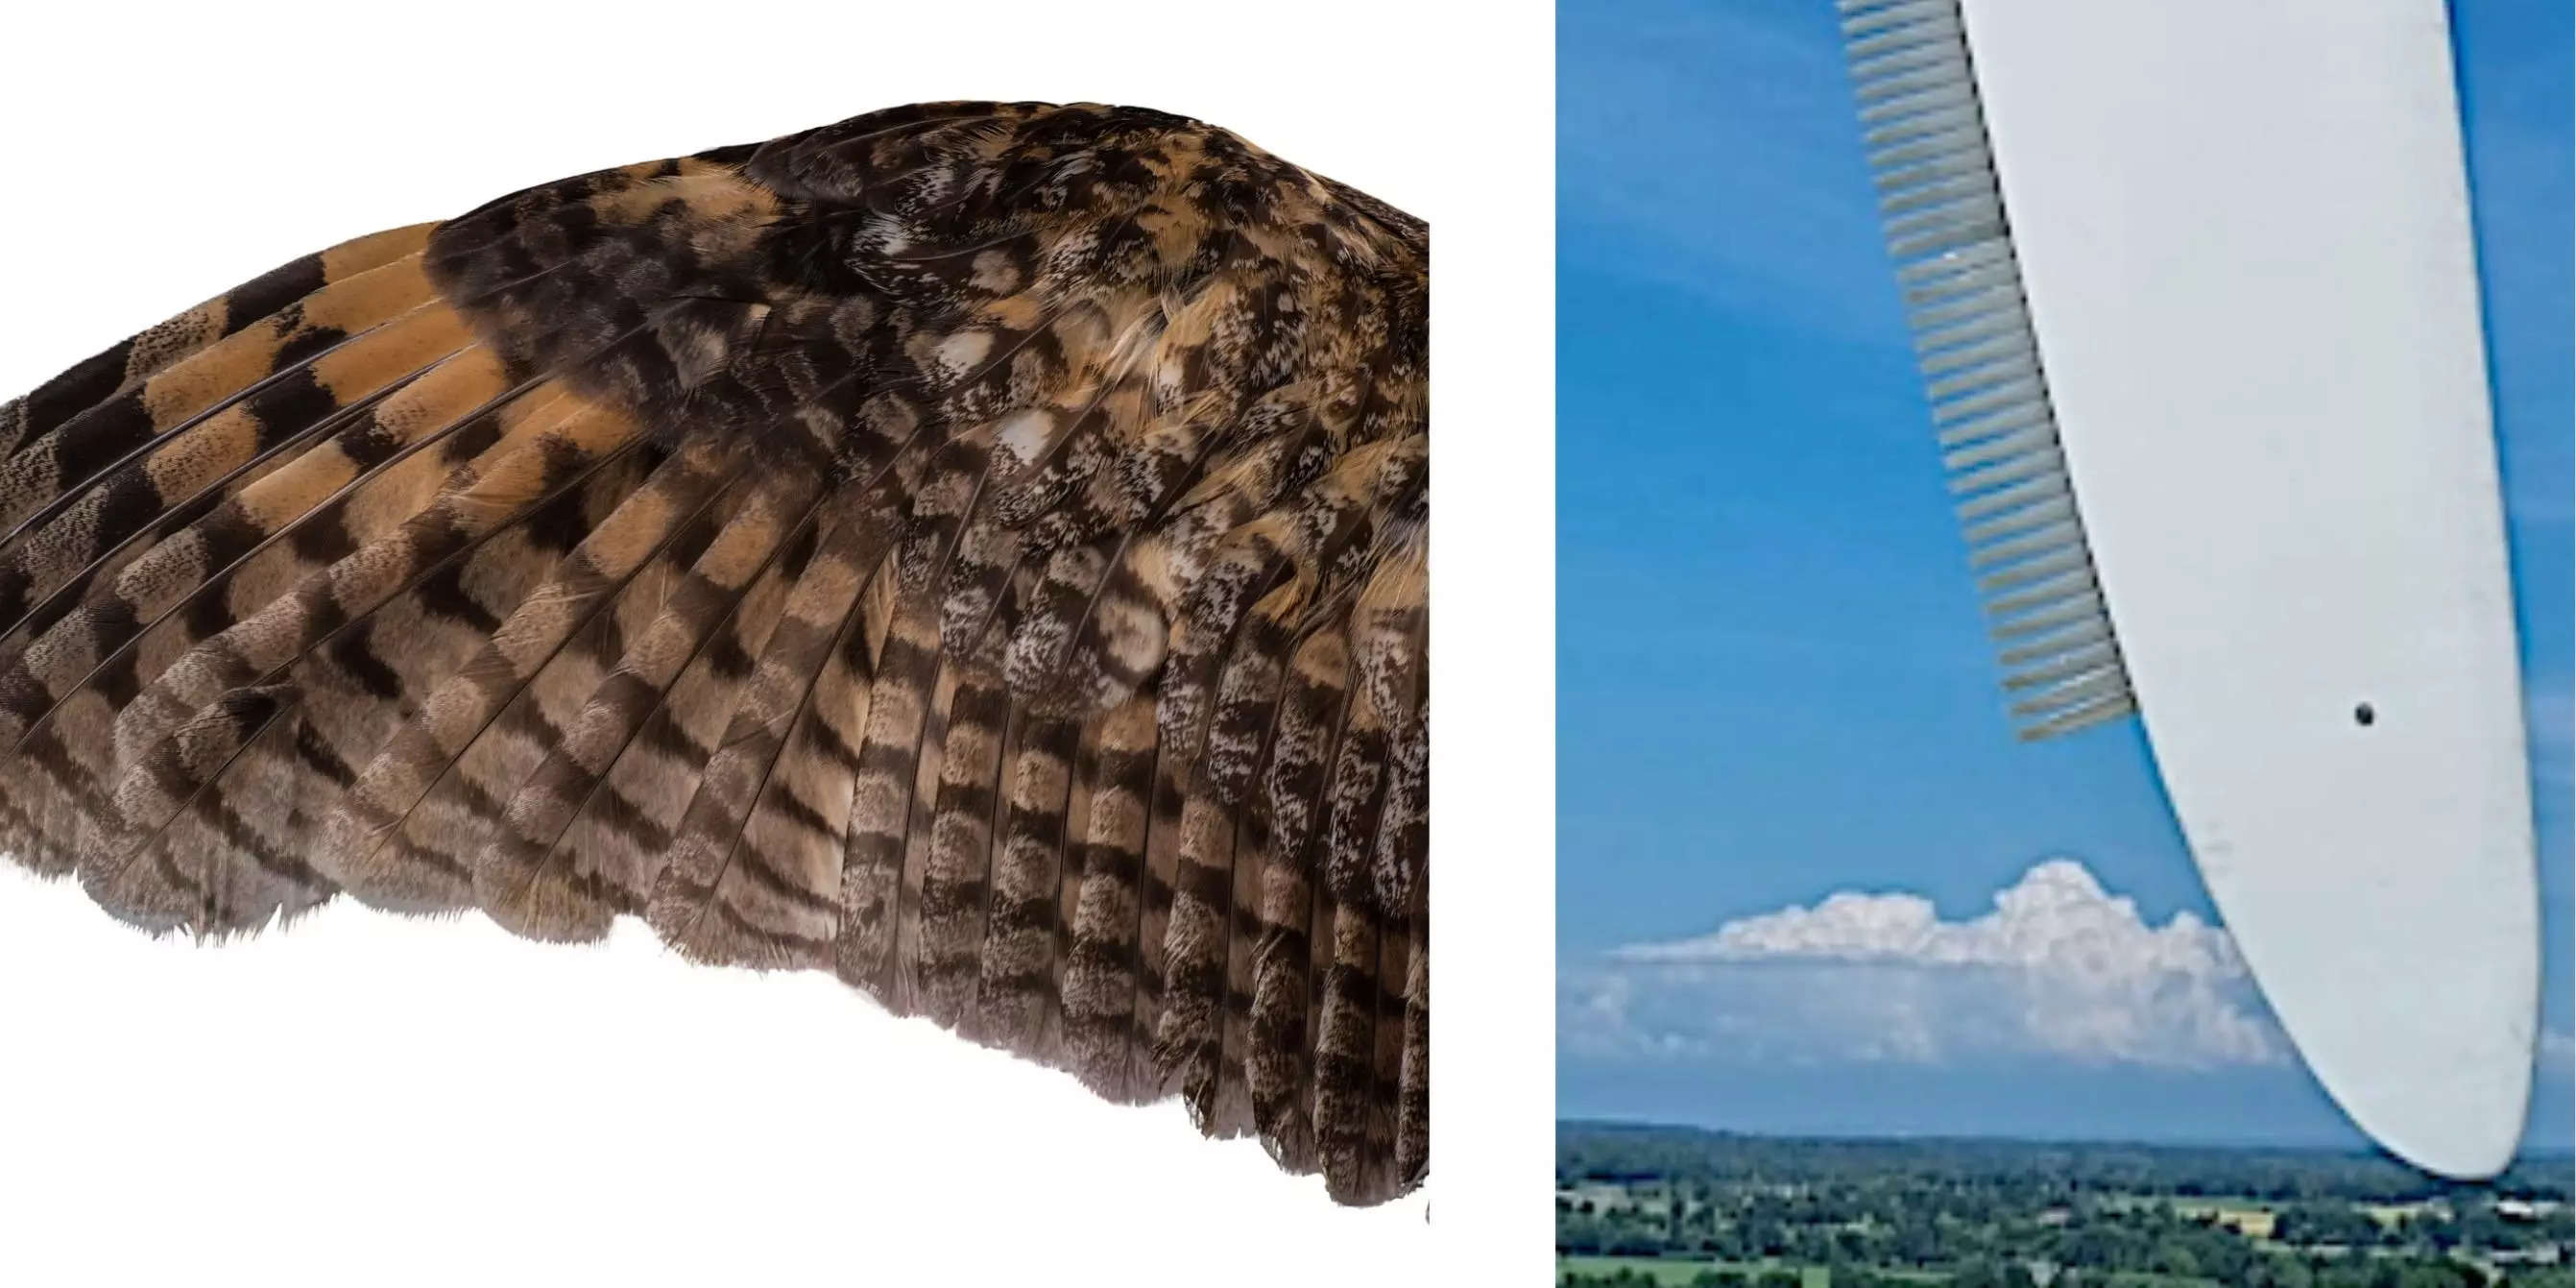 Brown owl wing on left and white wind turbine with spikes on right